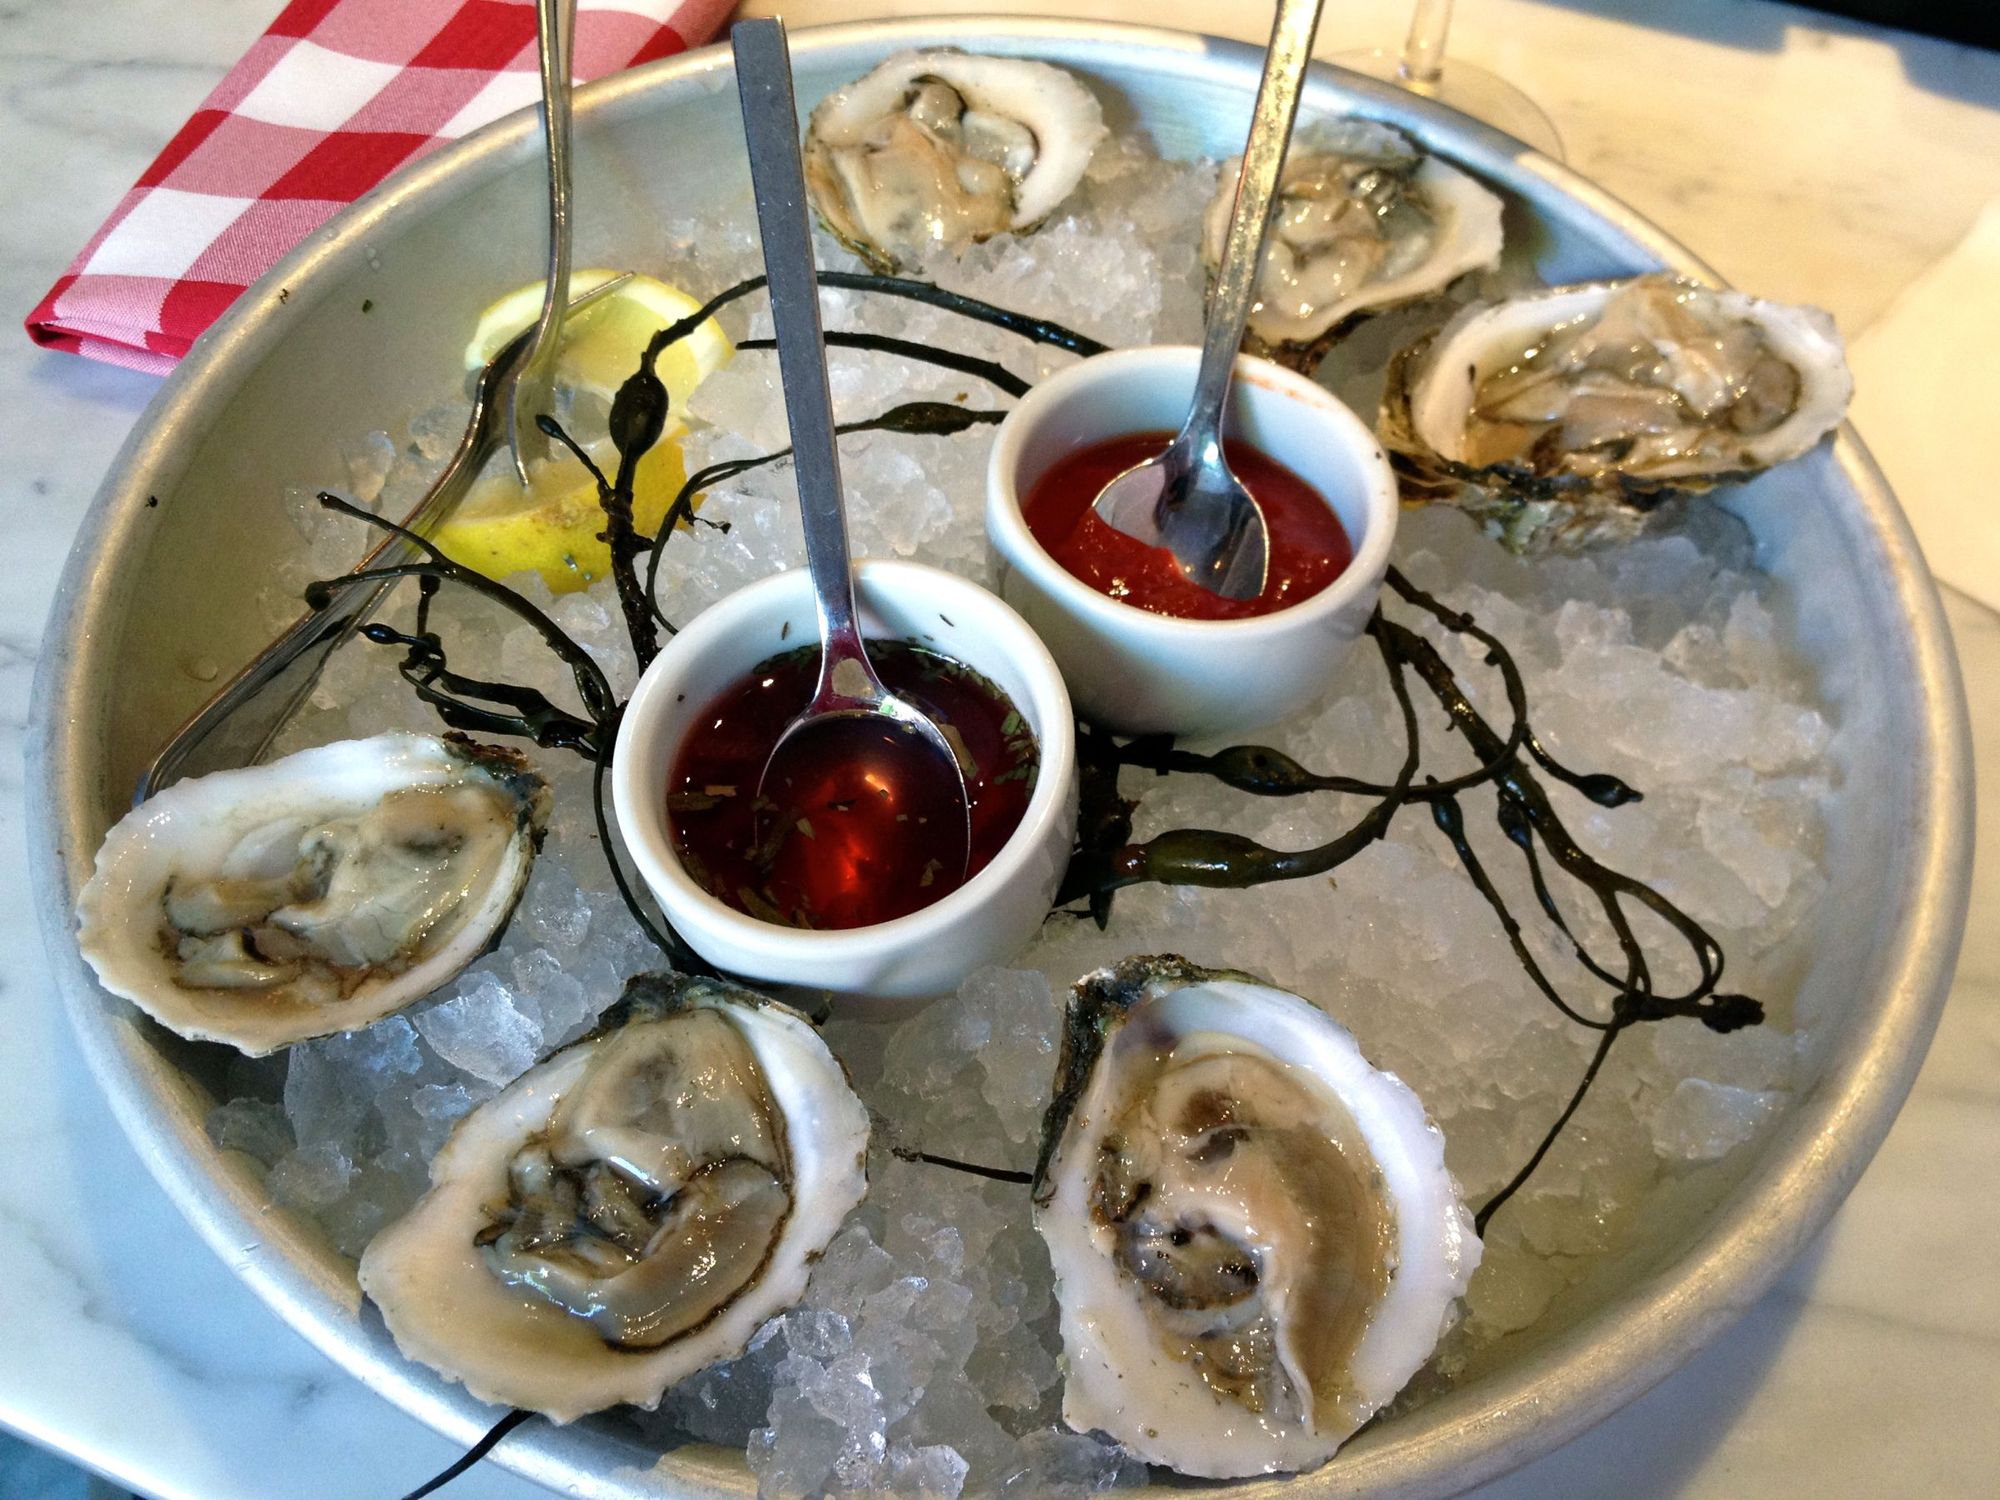 Bargain Bite Of The Week: $1 Oysters At Grand Central Oyster Bar Brooklyn